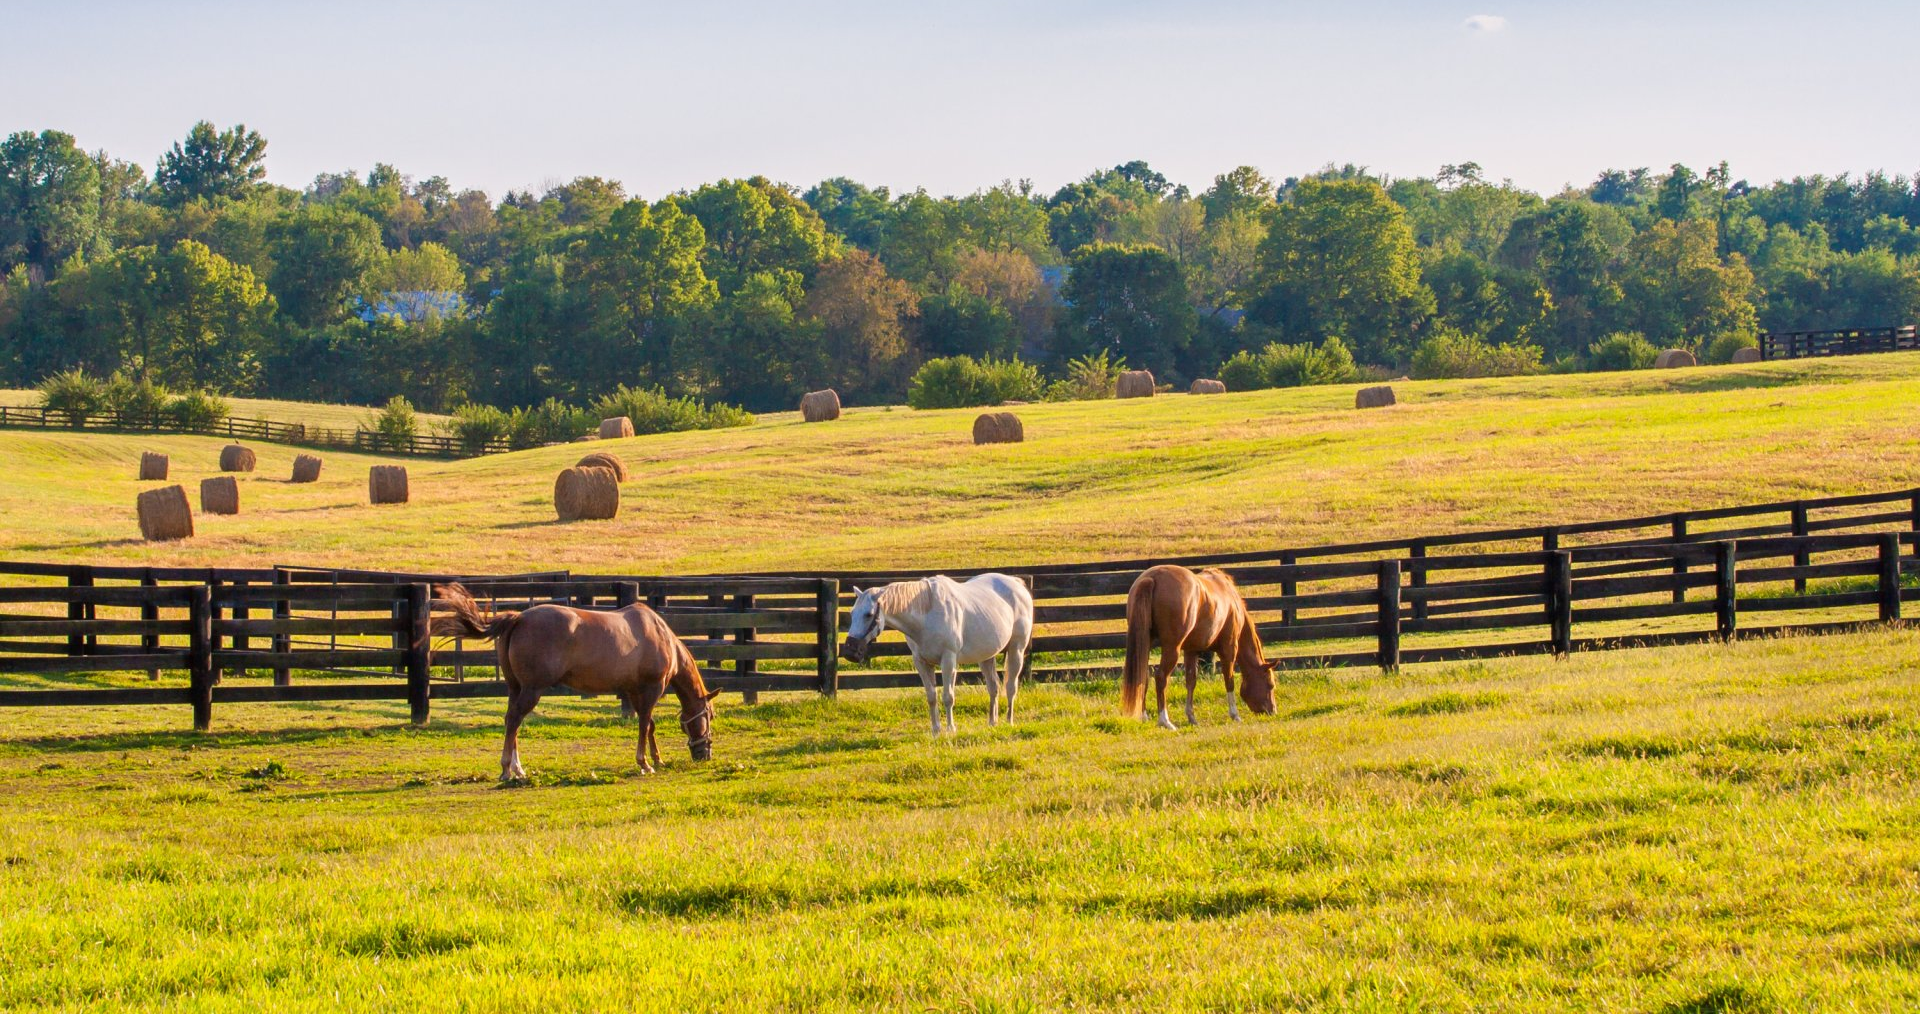 Horses at horse farm at golden hour. Country summer landscape.